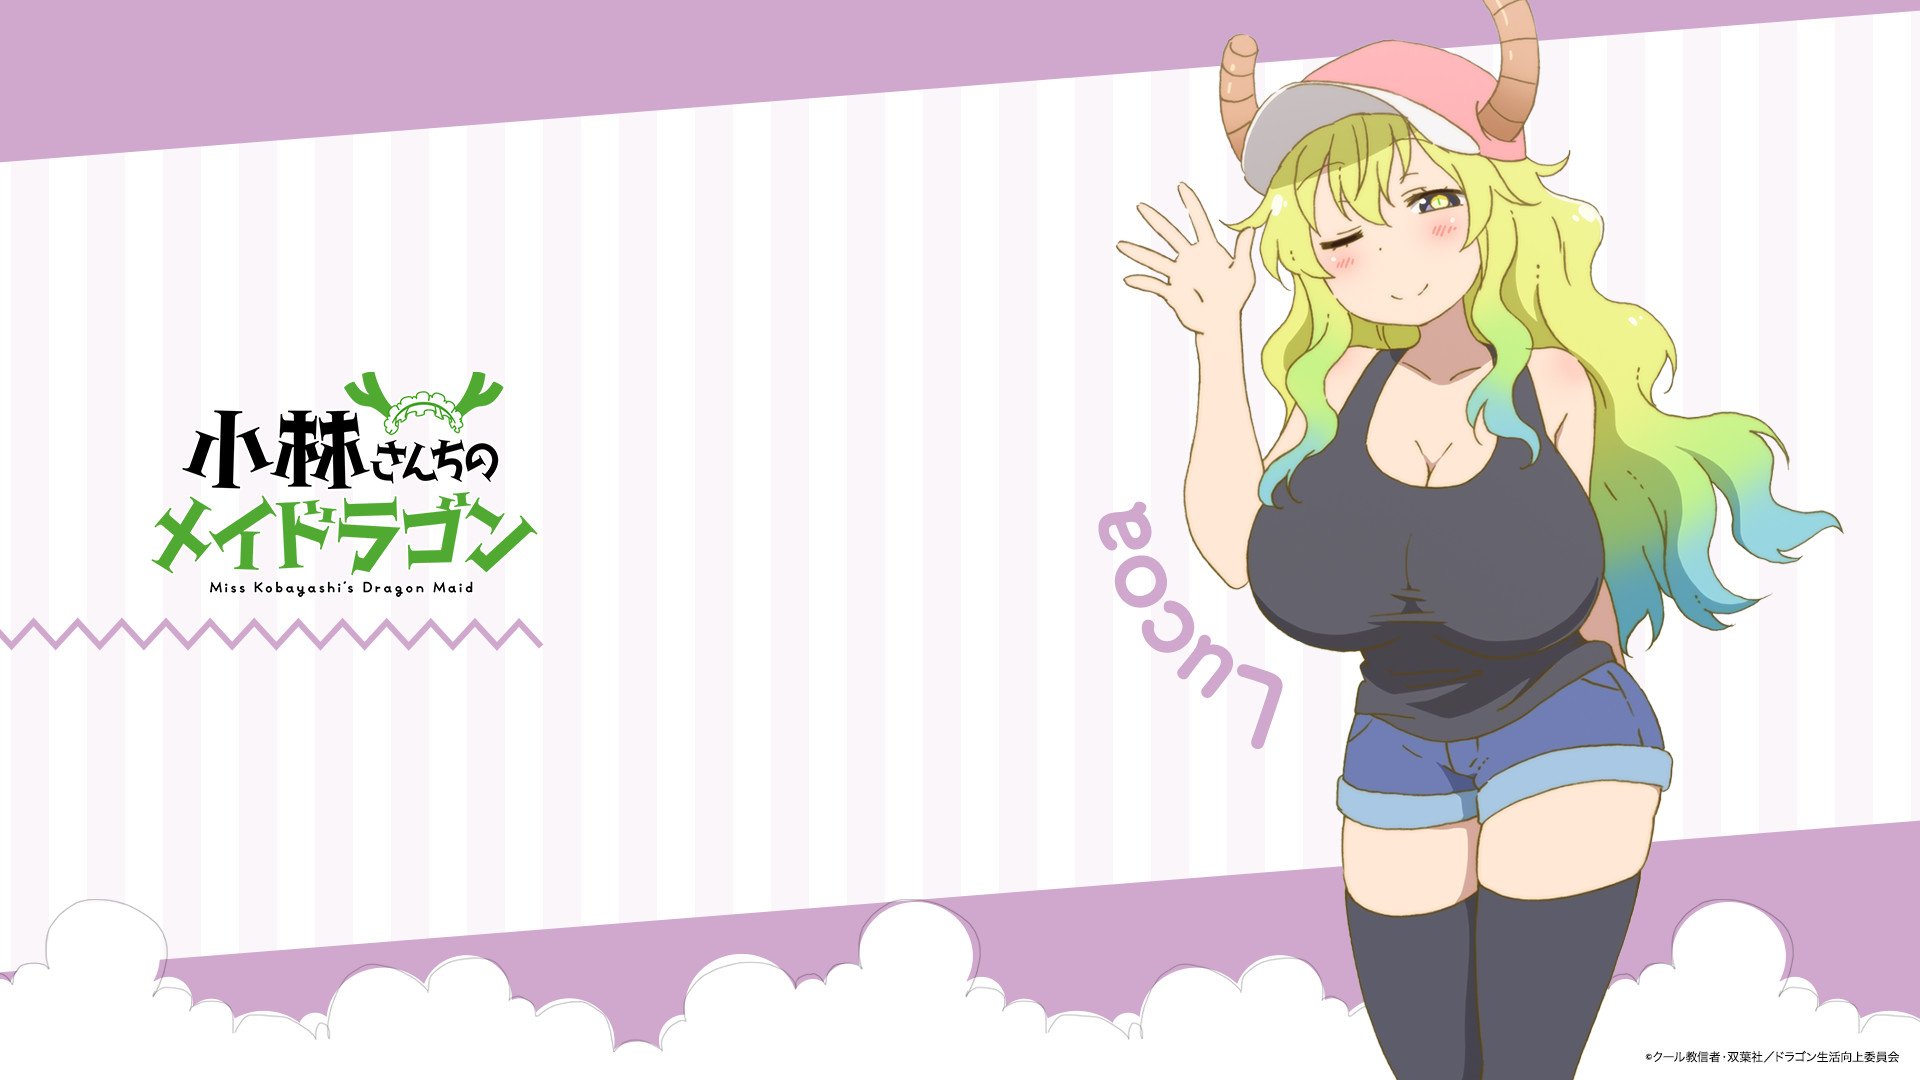 Lucoa Official Character Art At The Launch Of Anime By